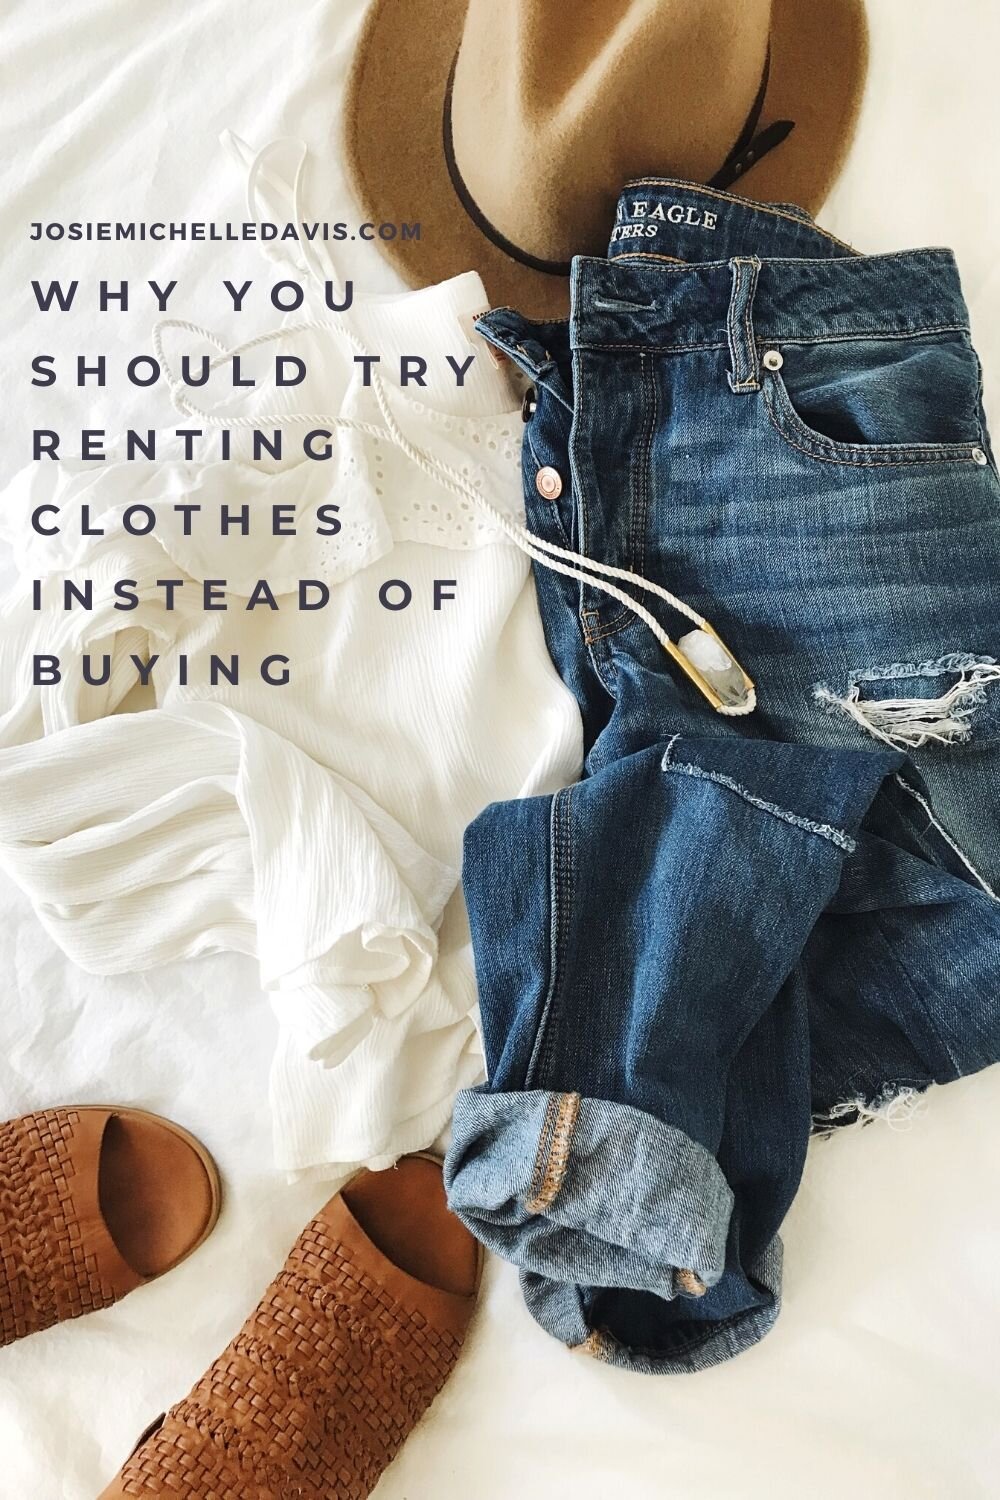 Why You Should Ty Renting Clothes instead of Buying